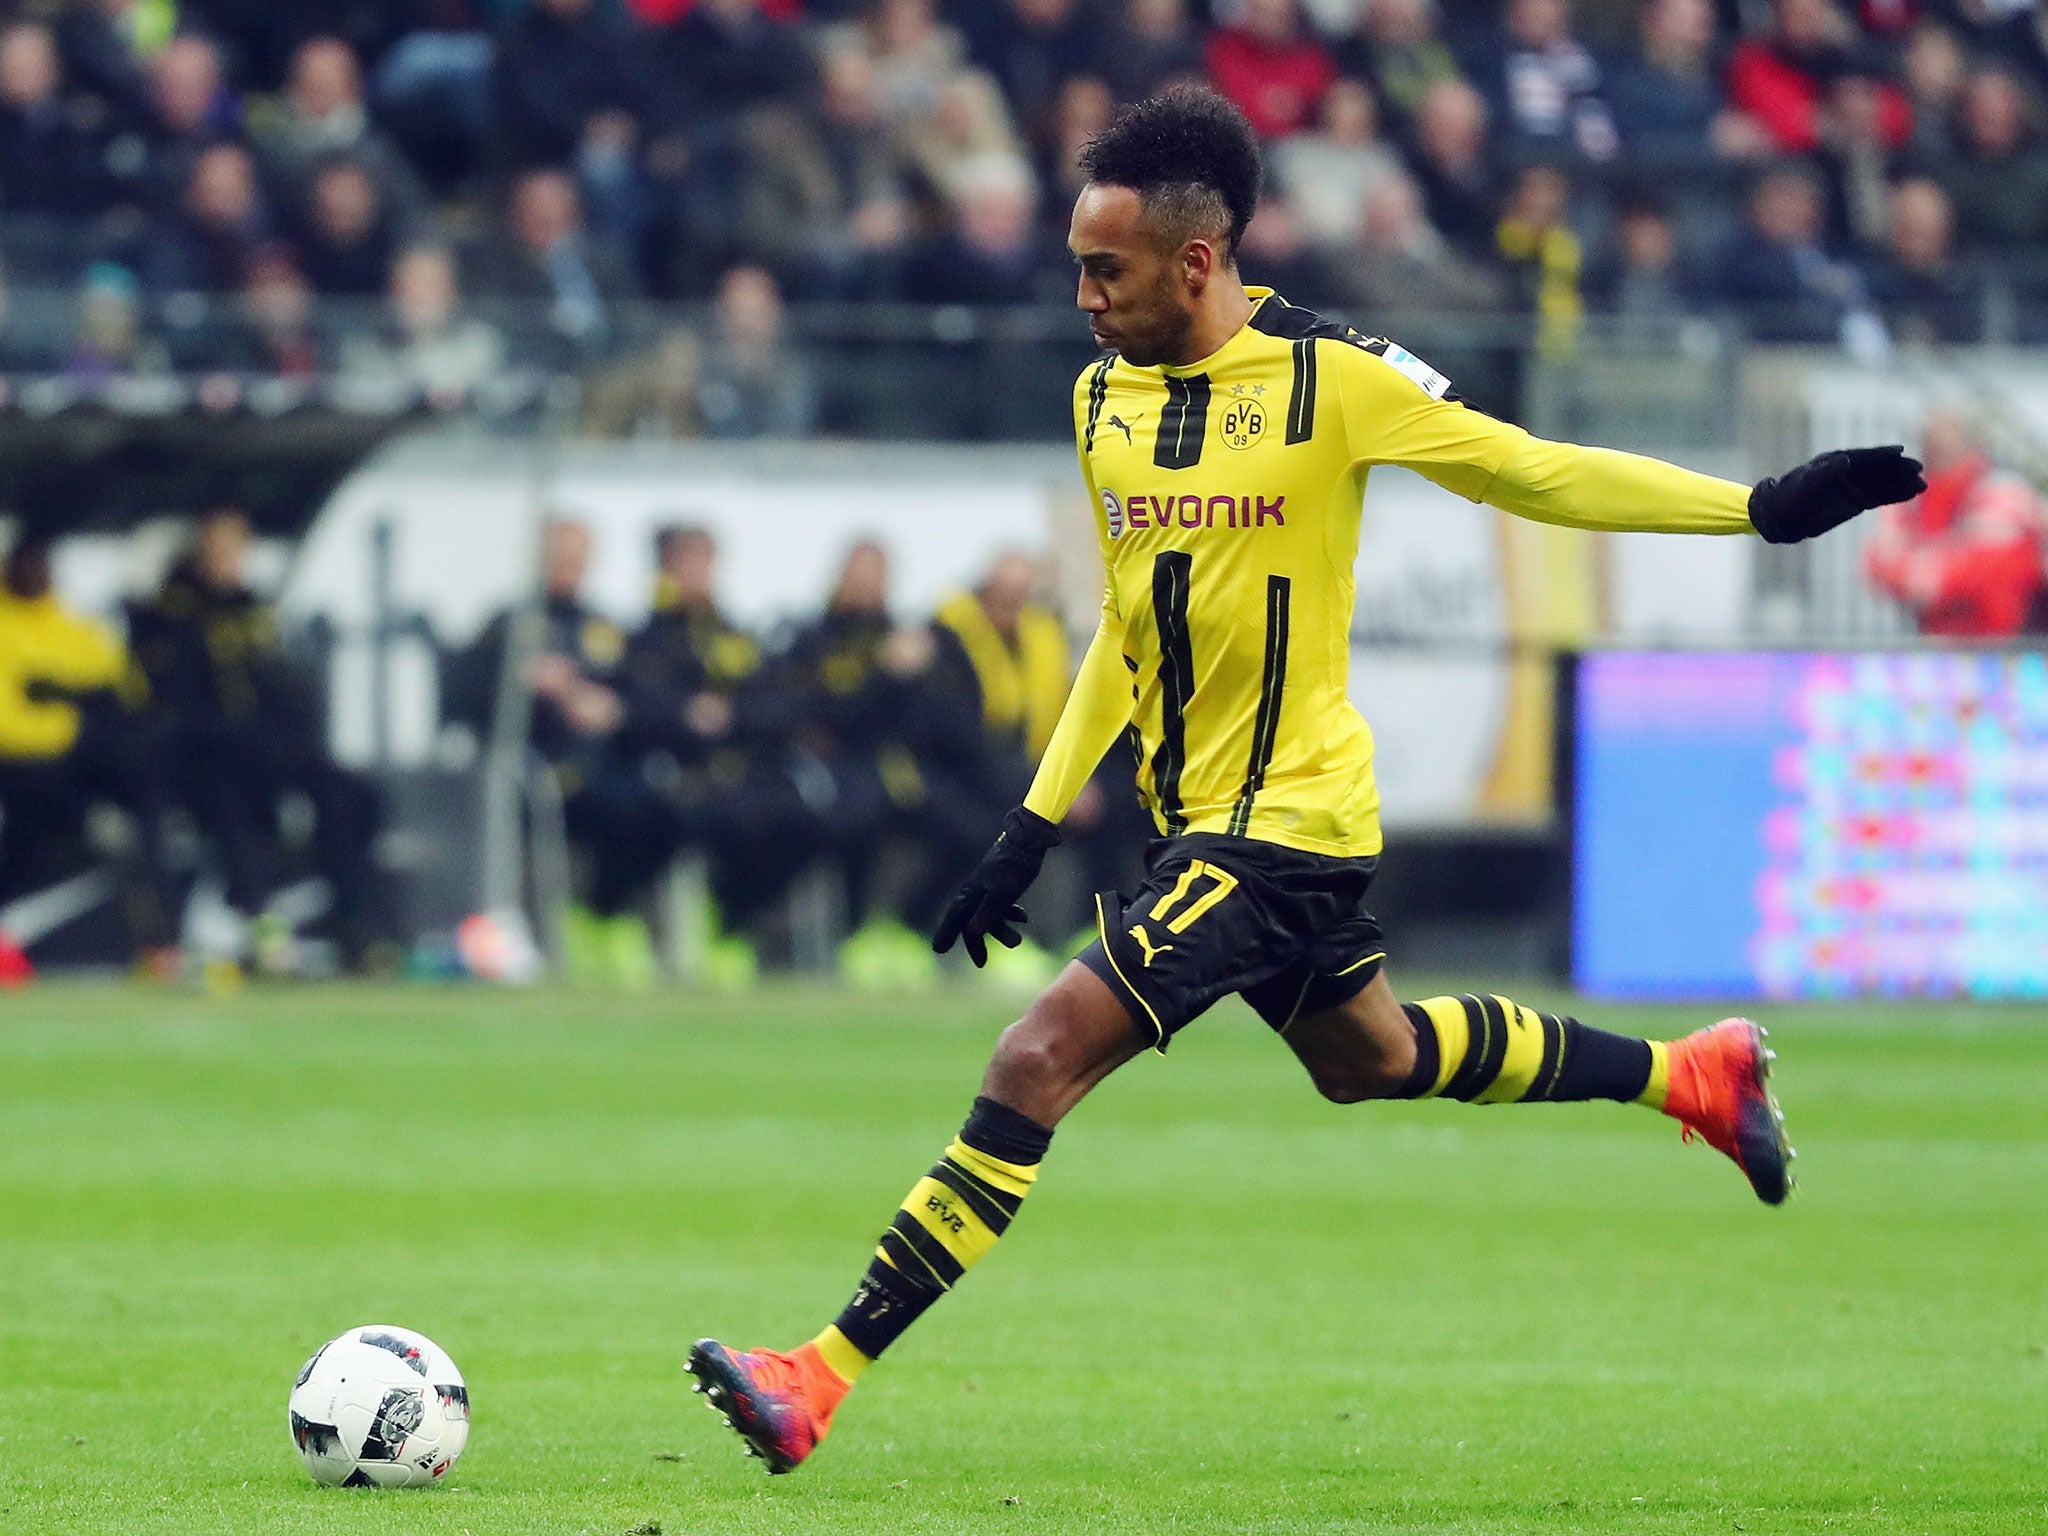 The Gabonese forward has scored a total of 85 goals from 125 appearances for Borussia Dortmund